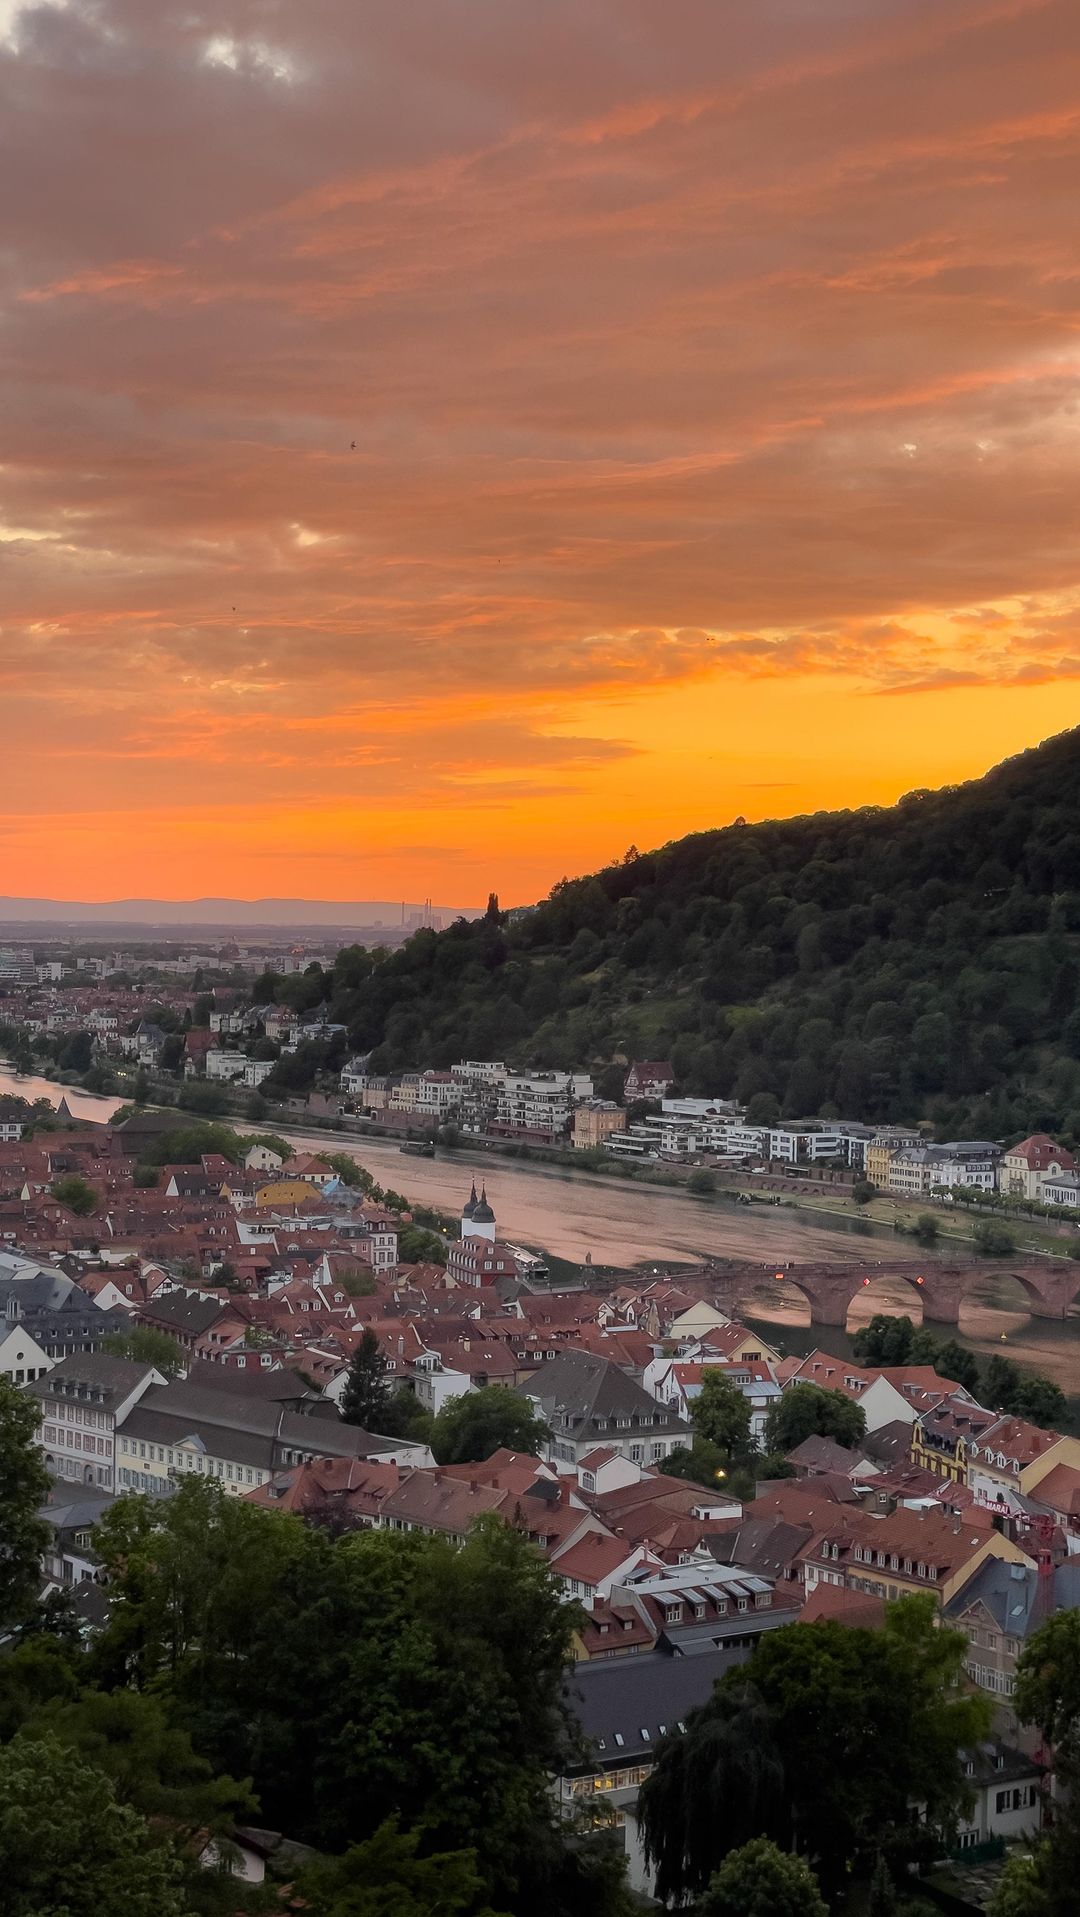 Cultural Delights of Heidelberg and Surroundings